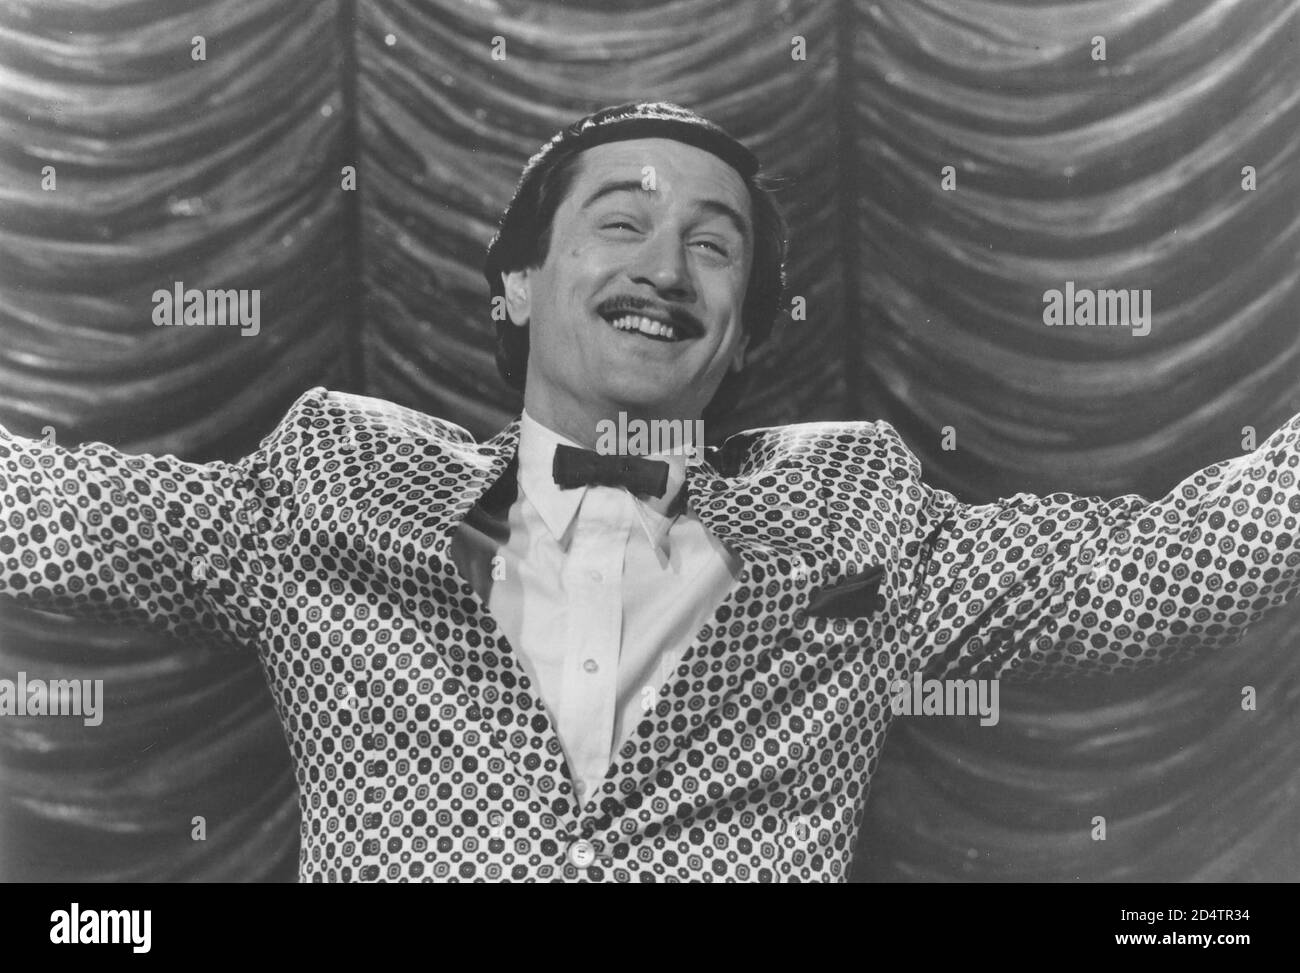 ROBERT DE NIRO in THE KING OF COMEDY (1982), directed by MARTIN SCORSESE. Copyright: Editorial use only. No merchandising or book covers. This is a publicly distributed handout. Access rights only, no license of copyright provided. Only to be reproduced in conjunction with promotion of this film. Credit: 20TH CENTURY FOX / Album Stock Photo